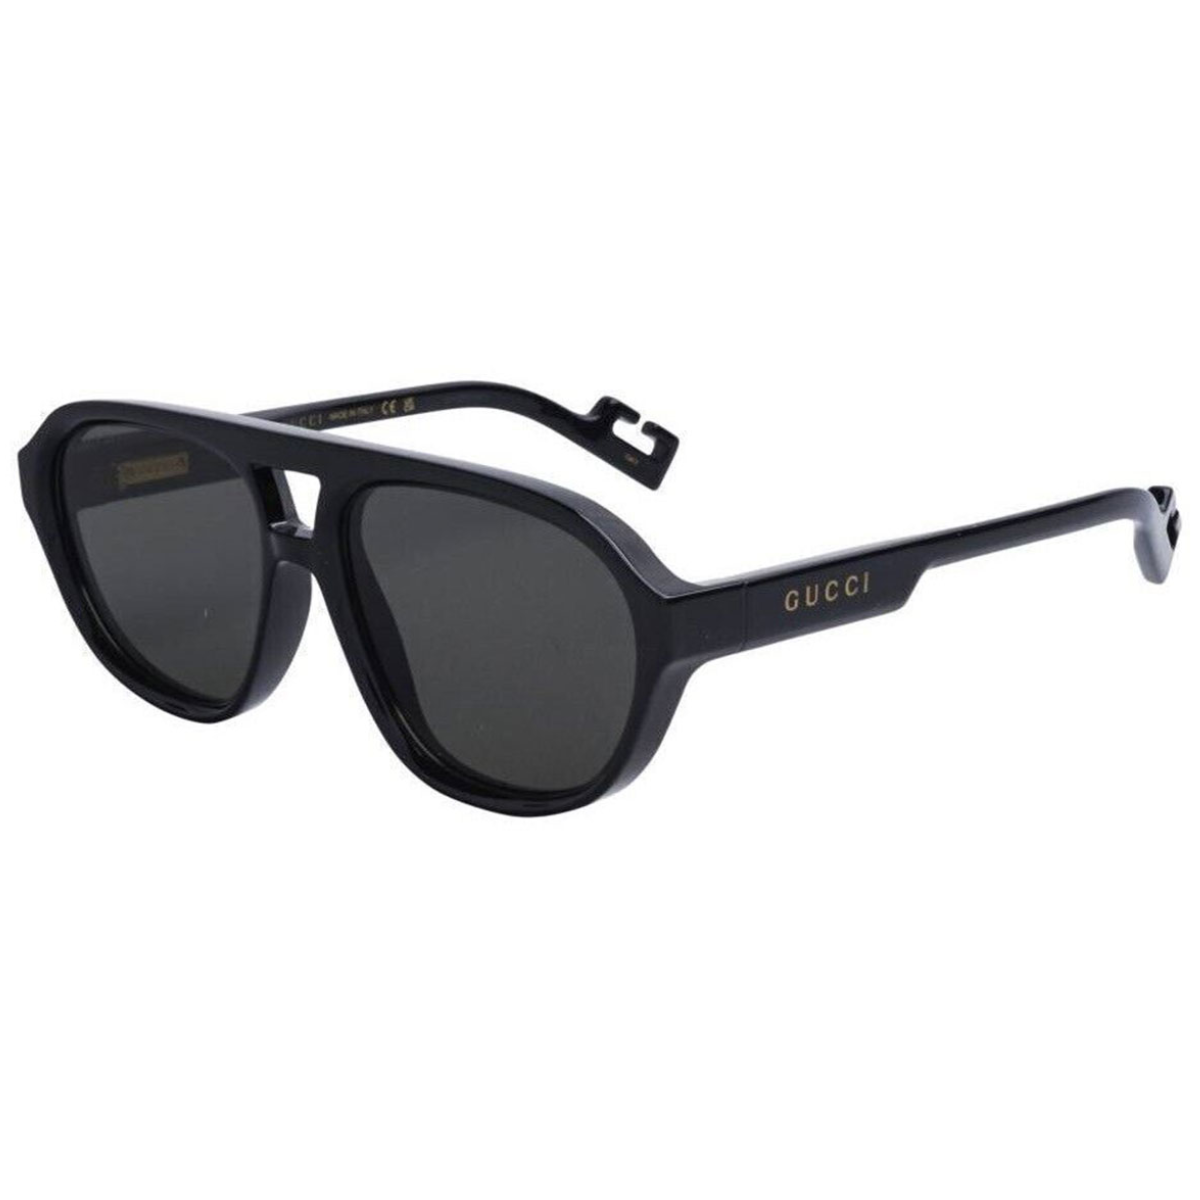 Gucci Shades: Fashion and UV Protection Combined gucci 1239s"